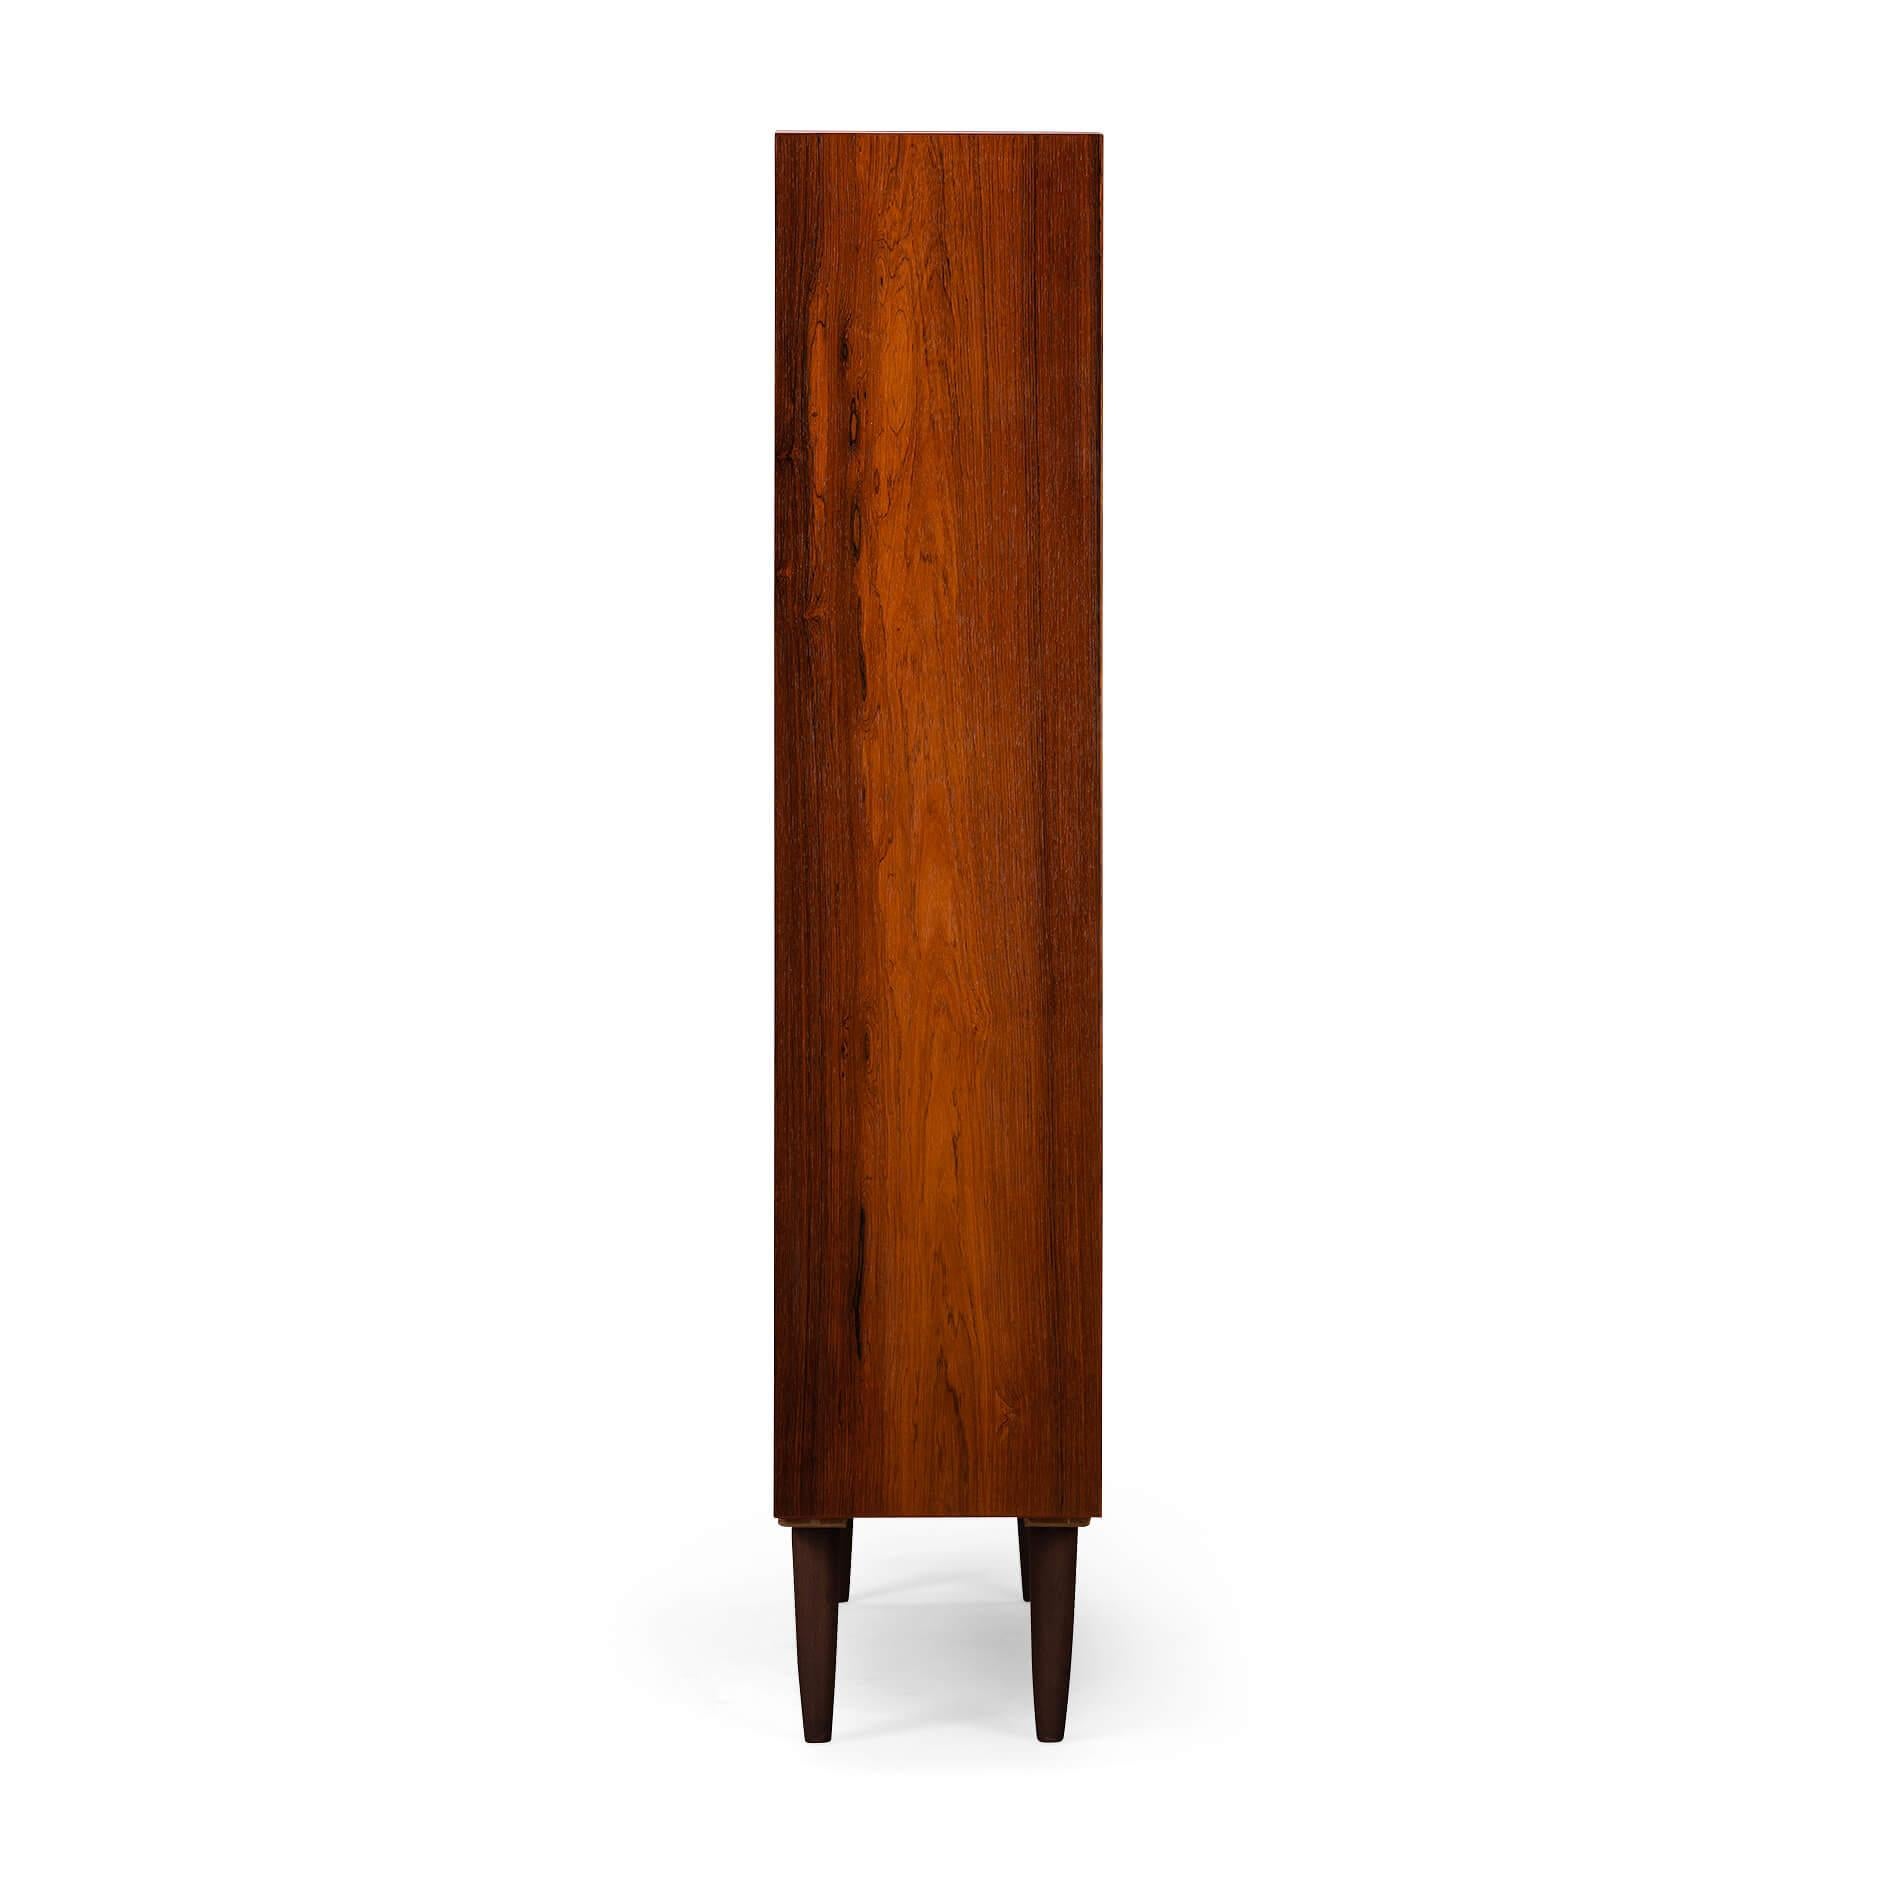 Danish Design
This stunning Danish Design Hundevad Bookcase from the 1960s is a timeless piece of furniture. It is crafted from rosewood, a durable and beautiful Material that is known for its warm tones and intricate grain patterns. 

The